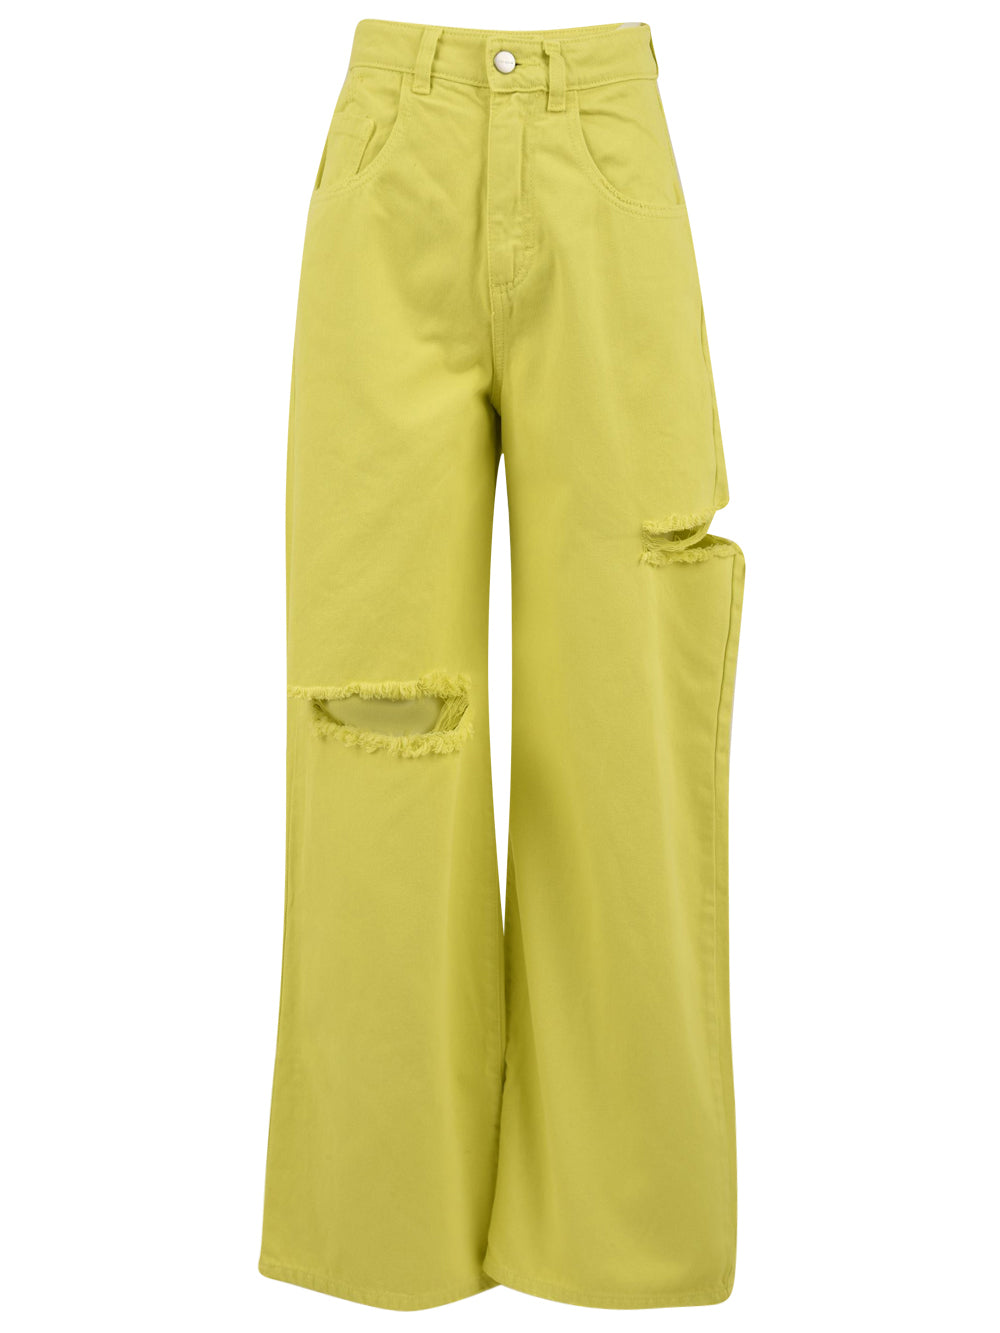 Jeans ICON DENIM LOS ANGELES Donna POPPY ID804 LIME Verde